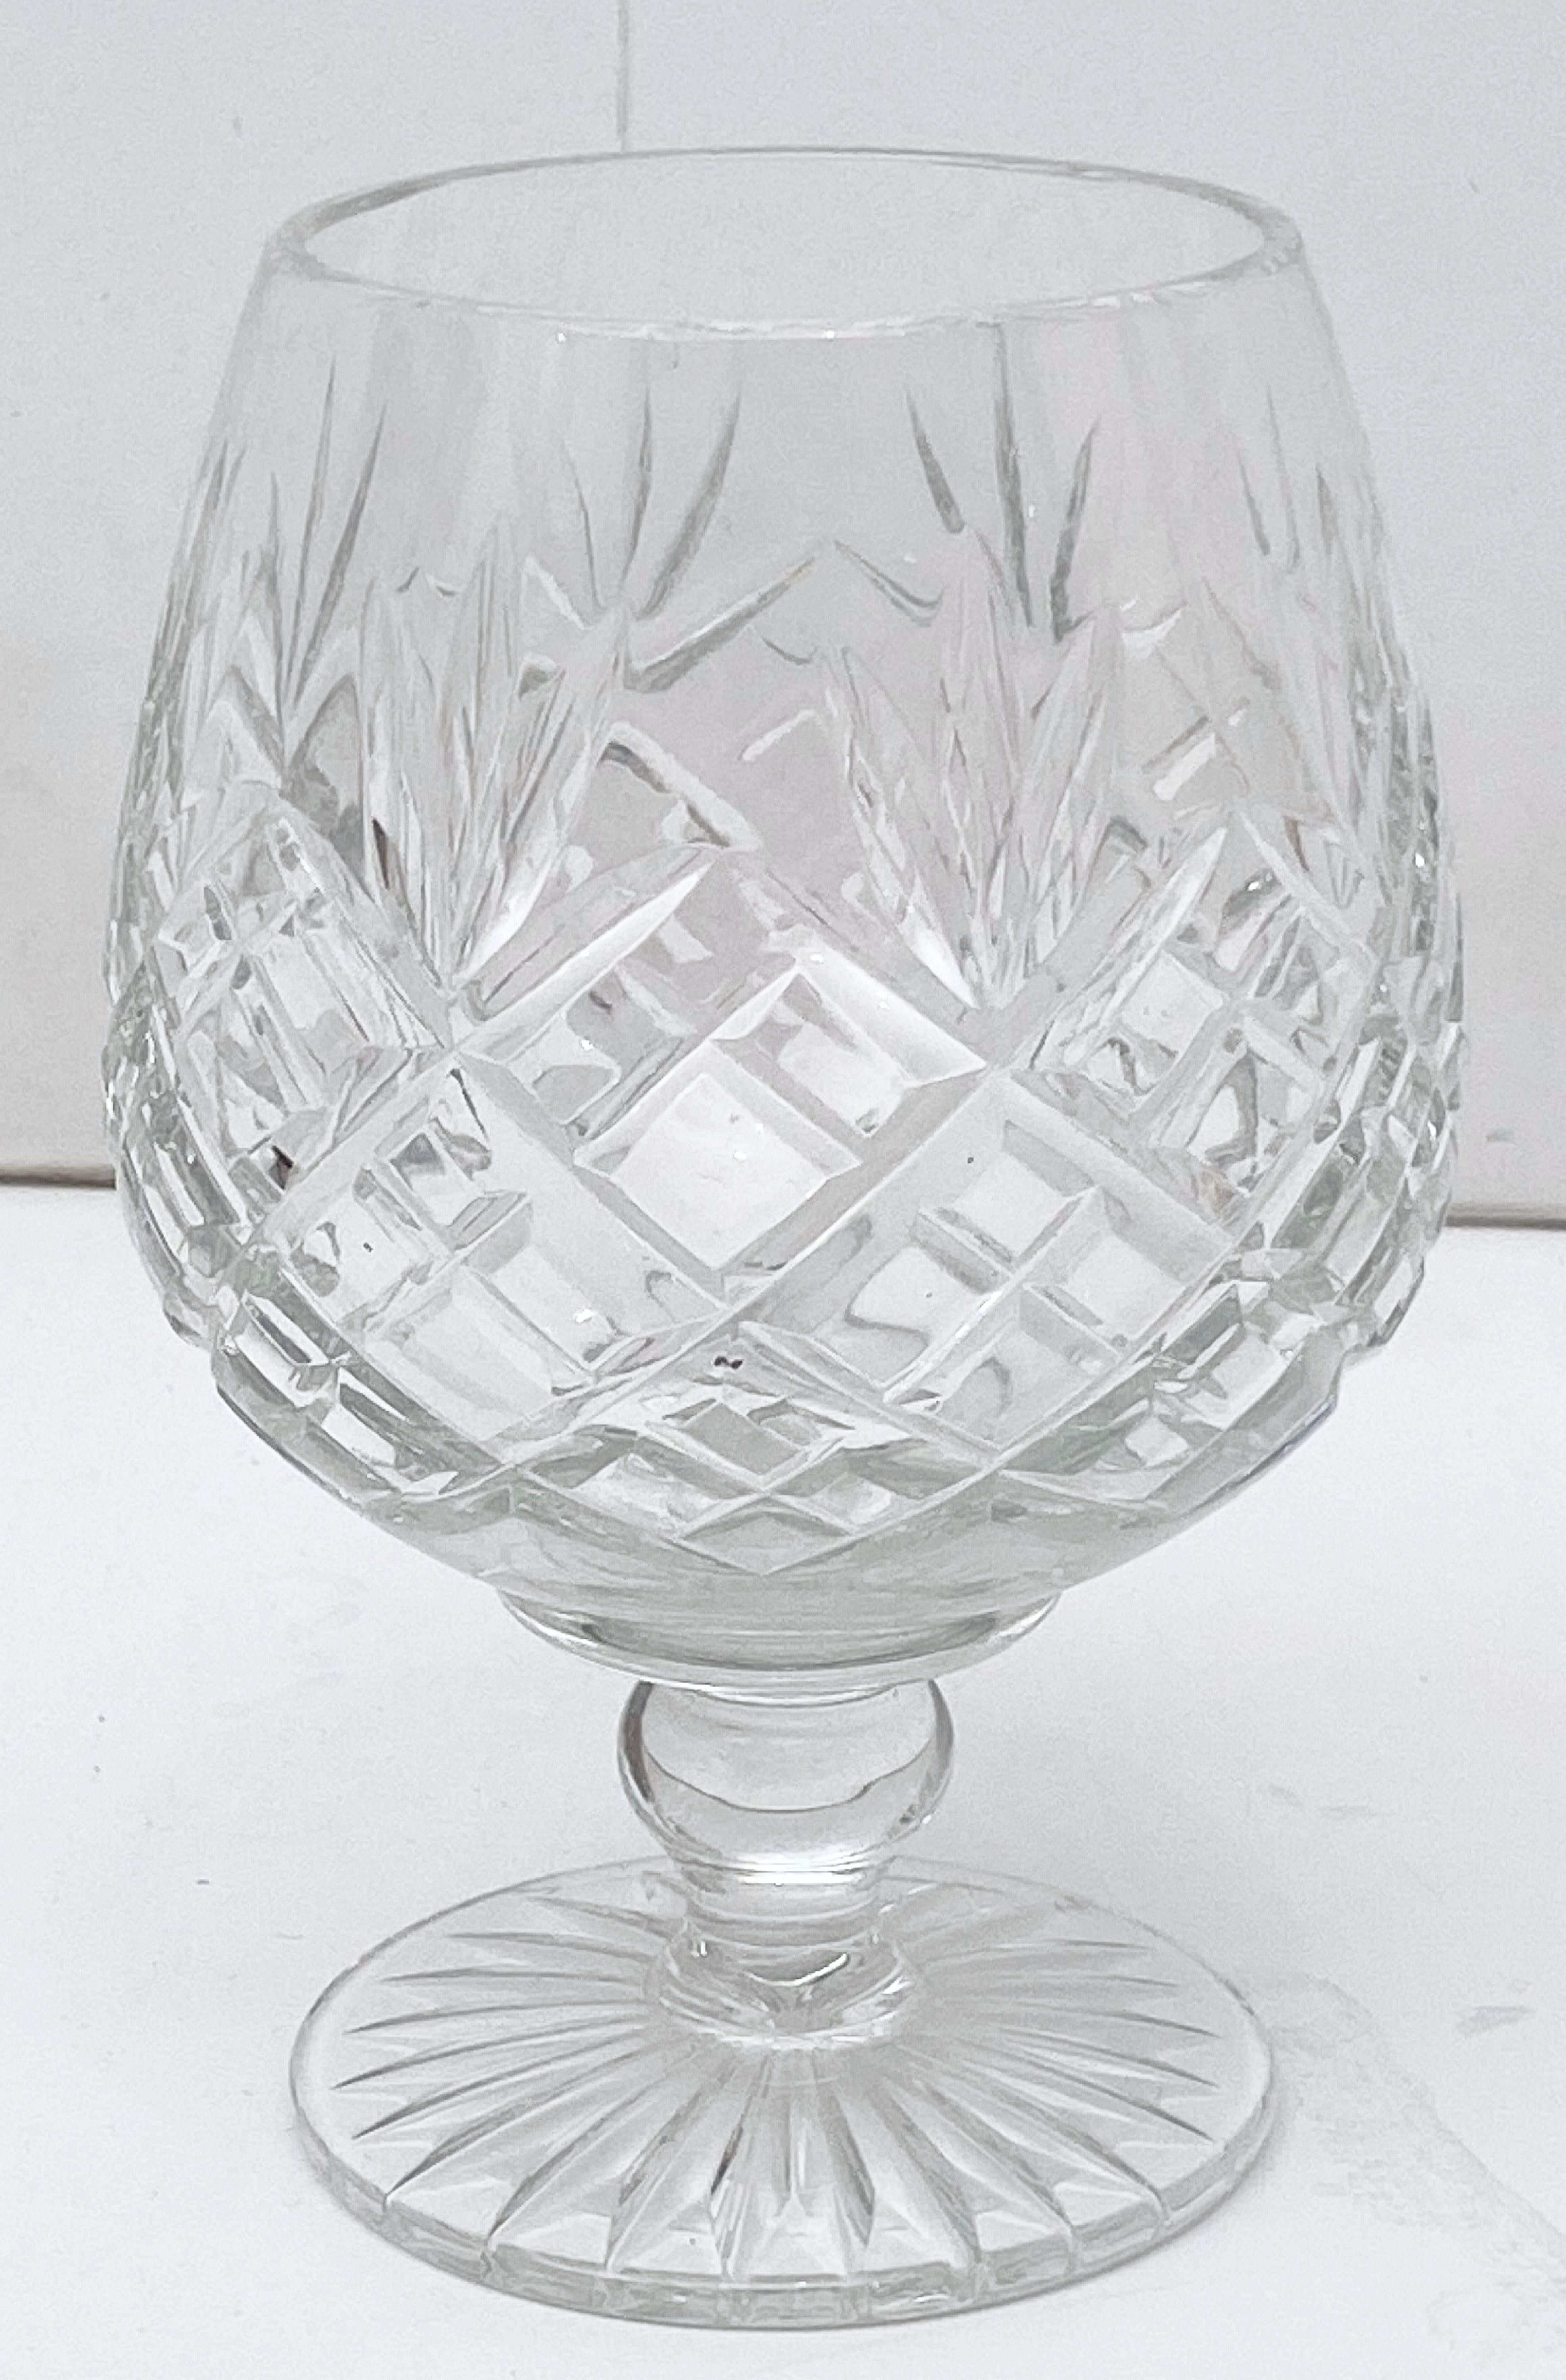 English Silver Brandy Warmer with Cut Crystal Glass Snifter 2